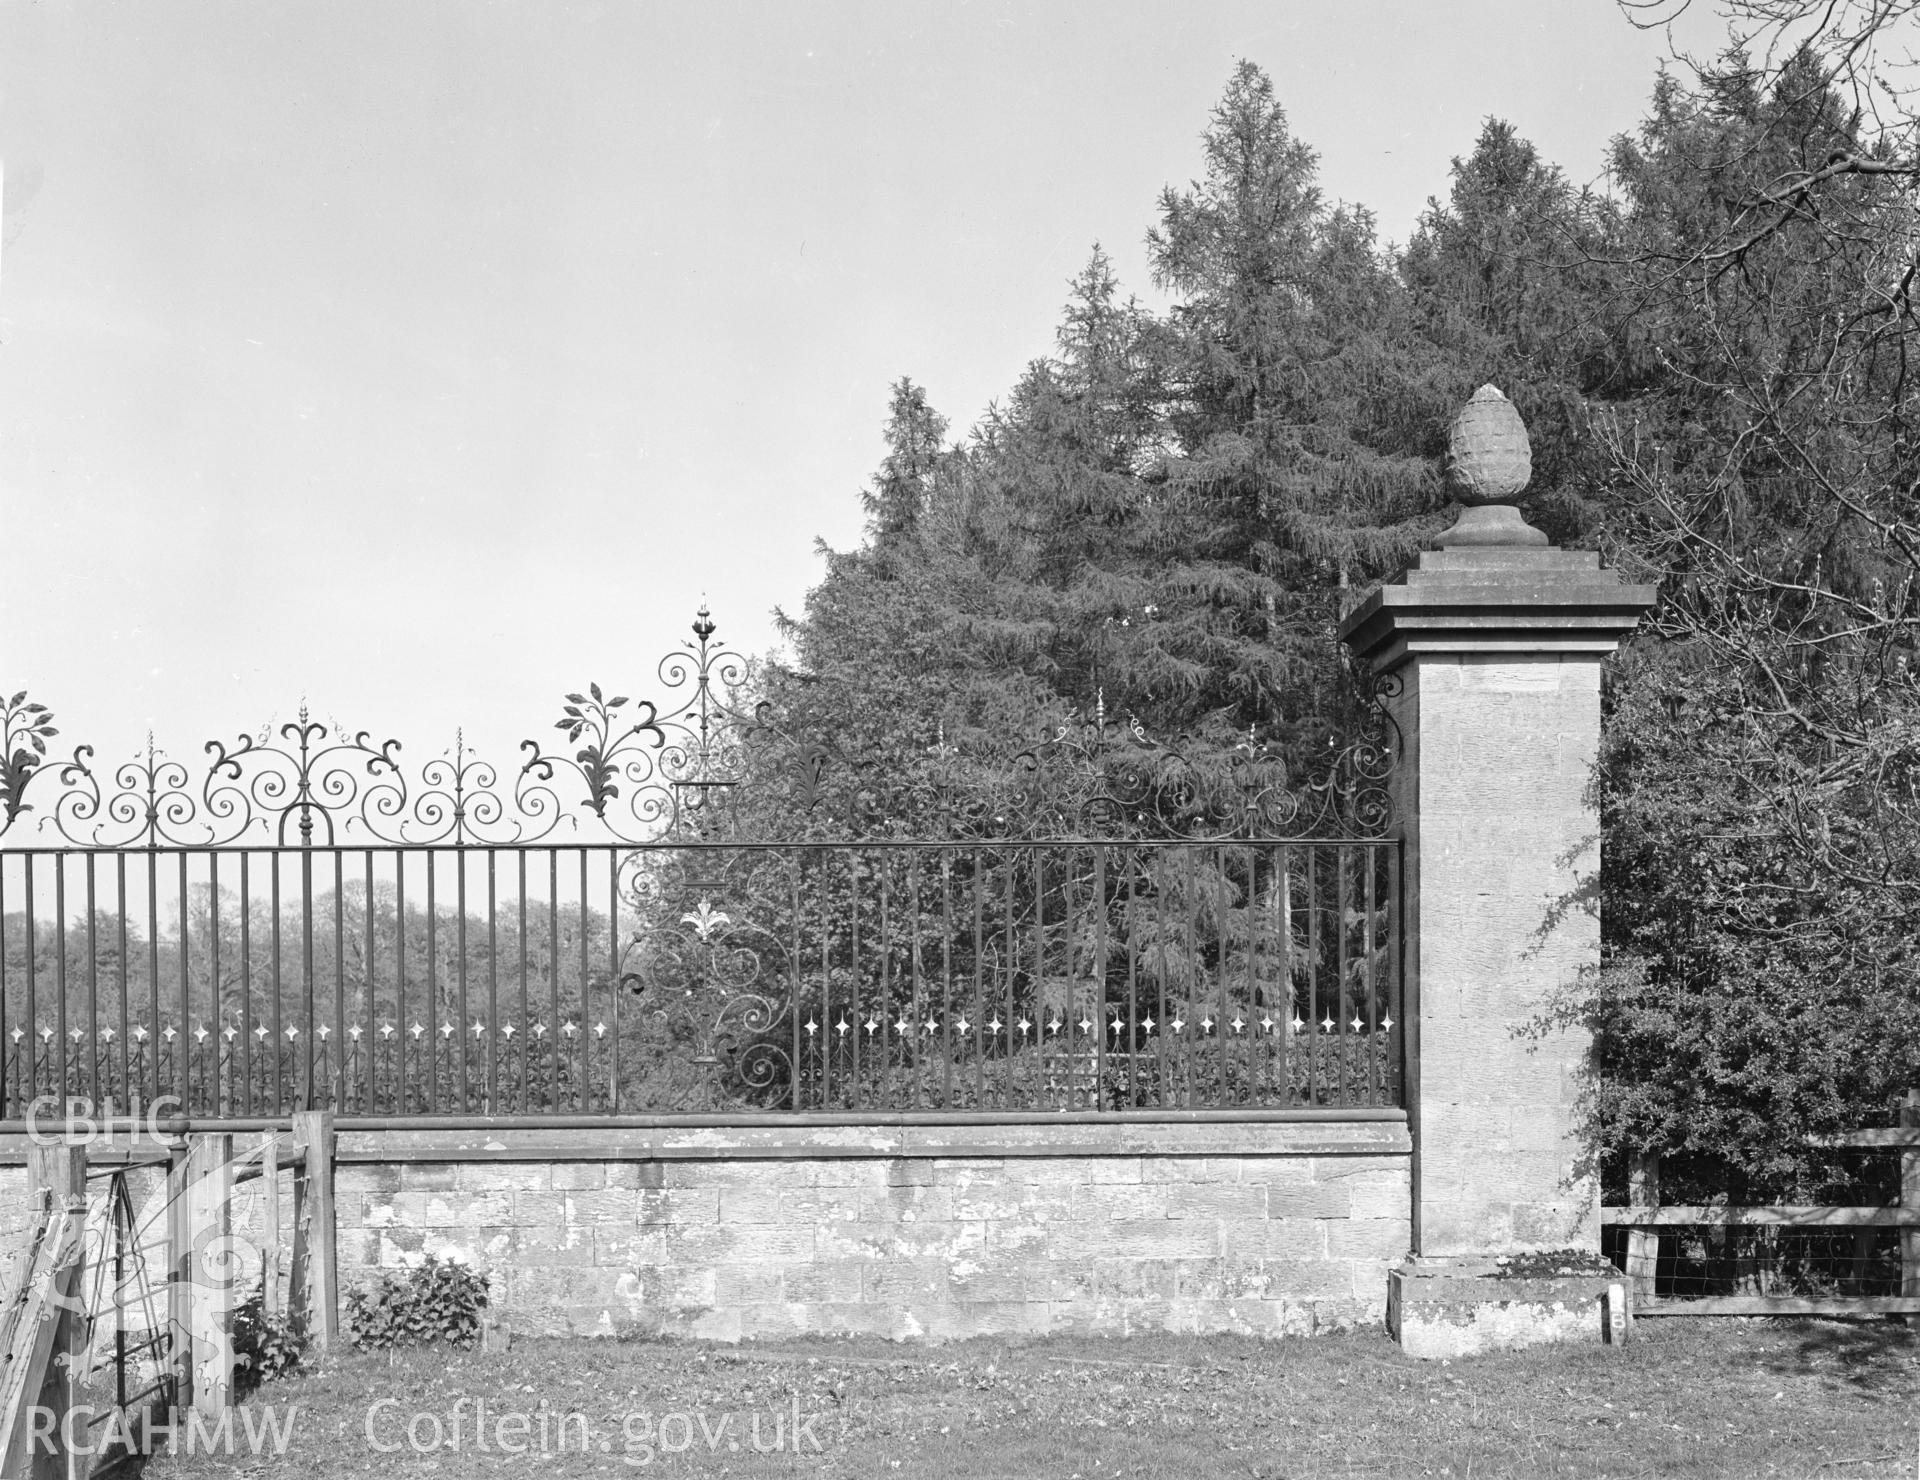 Digital copy of an acetate negative showing view of Chirk Castle gates taken by Department of Environment in 1977.